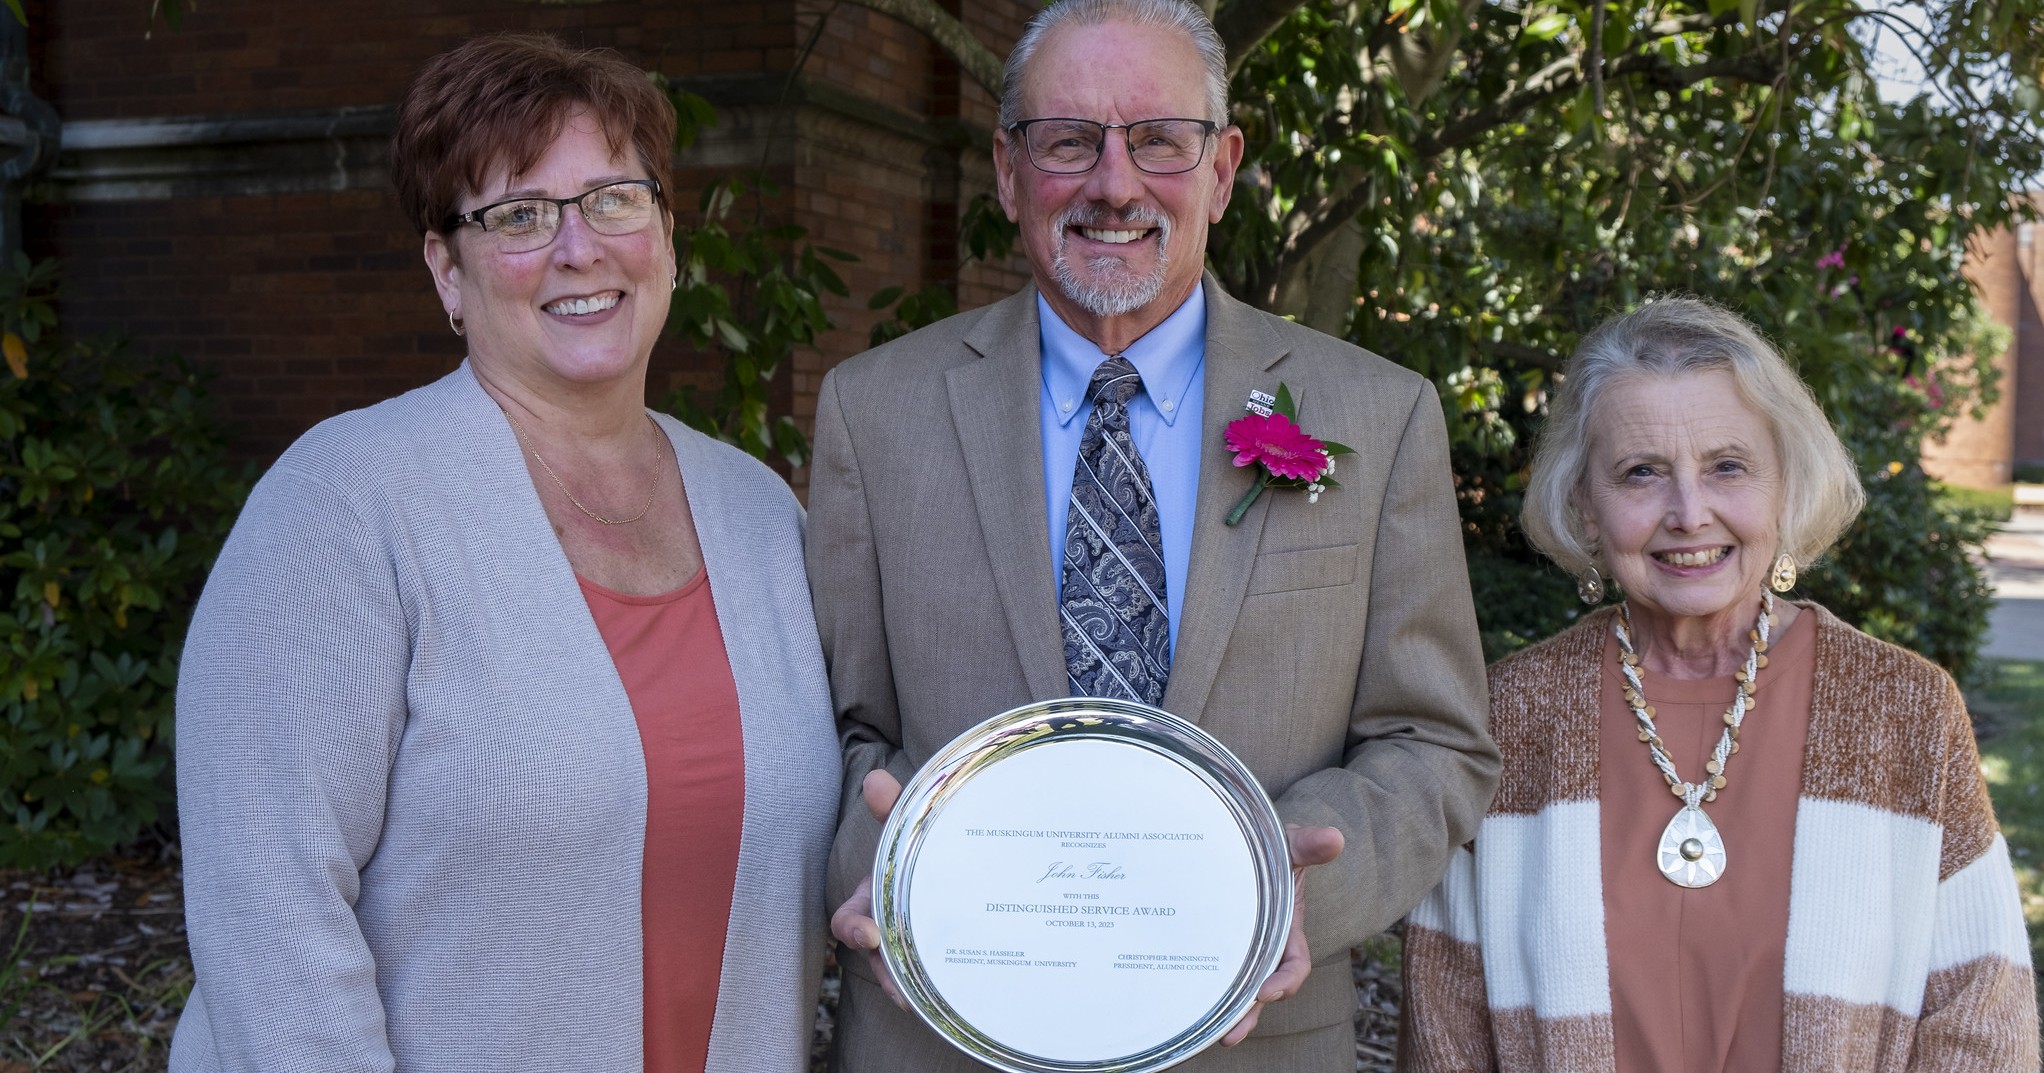 John Fisher and his family posed with his Muskingum University Distinguished Service Award.  